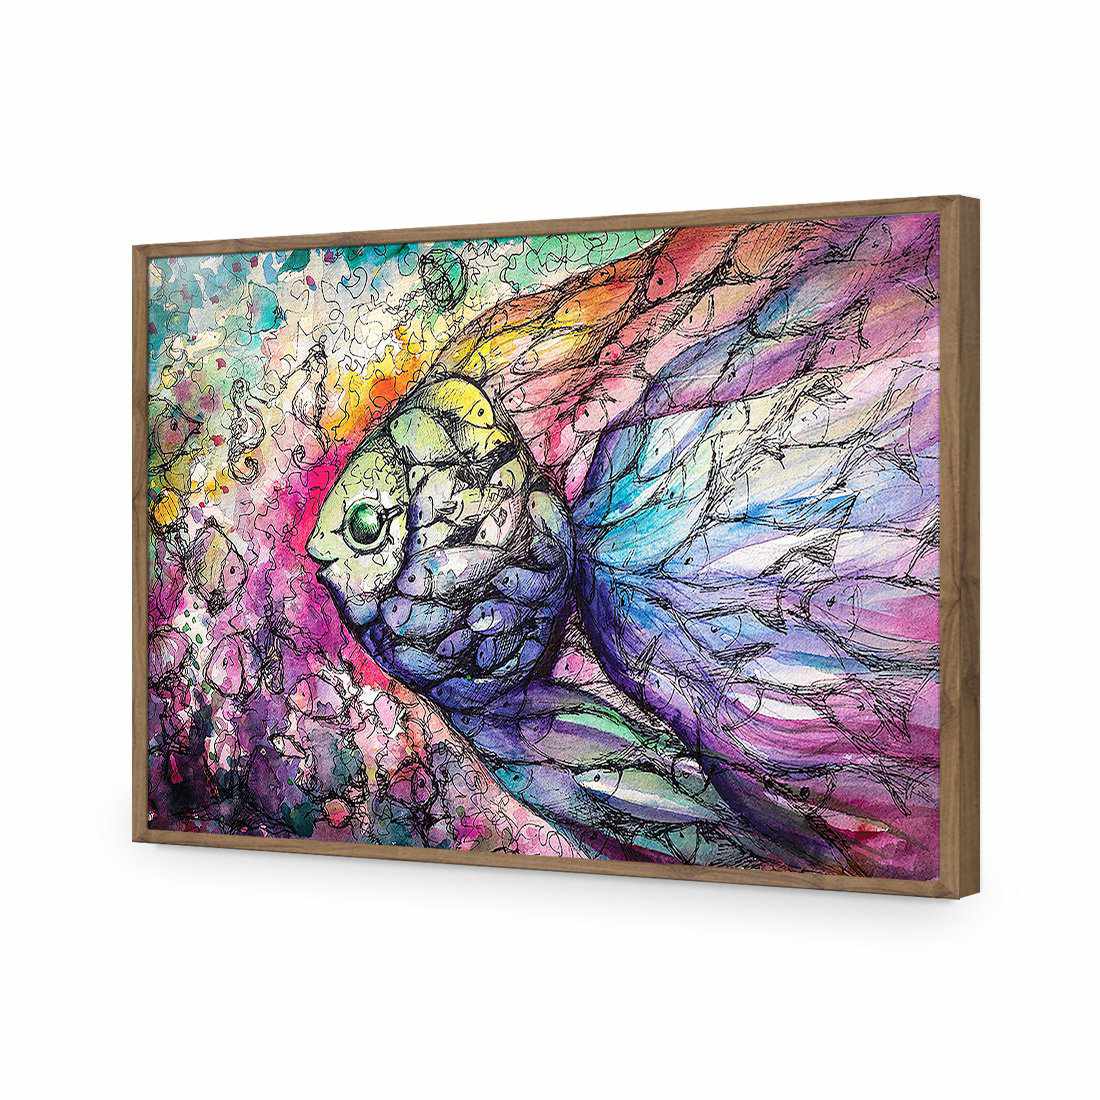 Scribblefish-Acrylic-Wall Art Design-Without Border-Acrylic - Natural Frame-45x30cm-Wall Art Designs